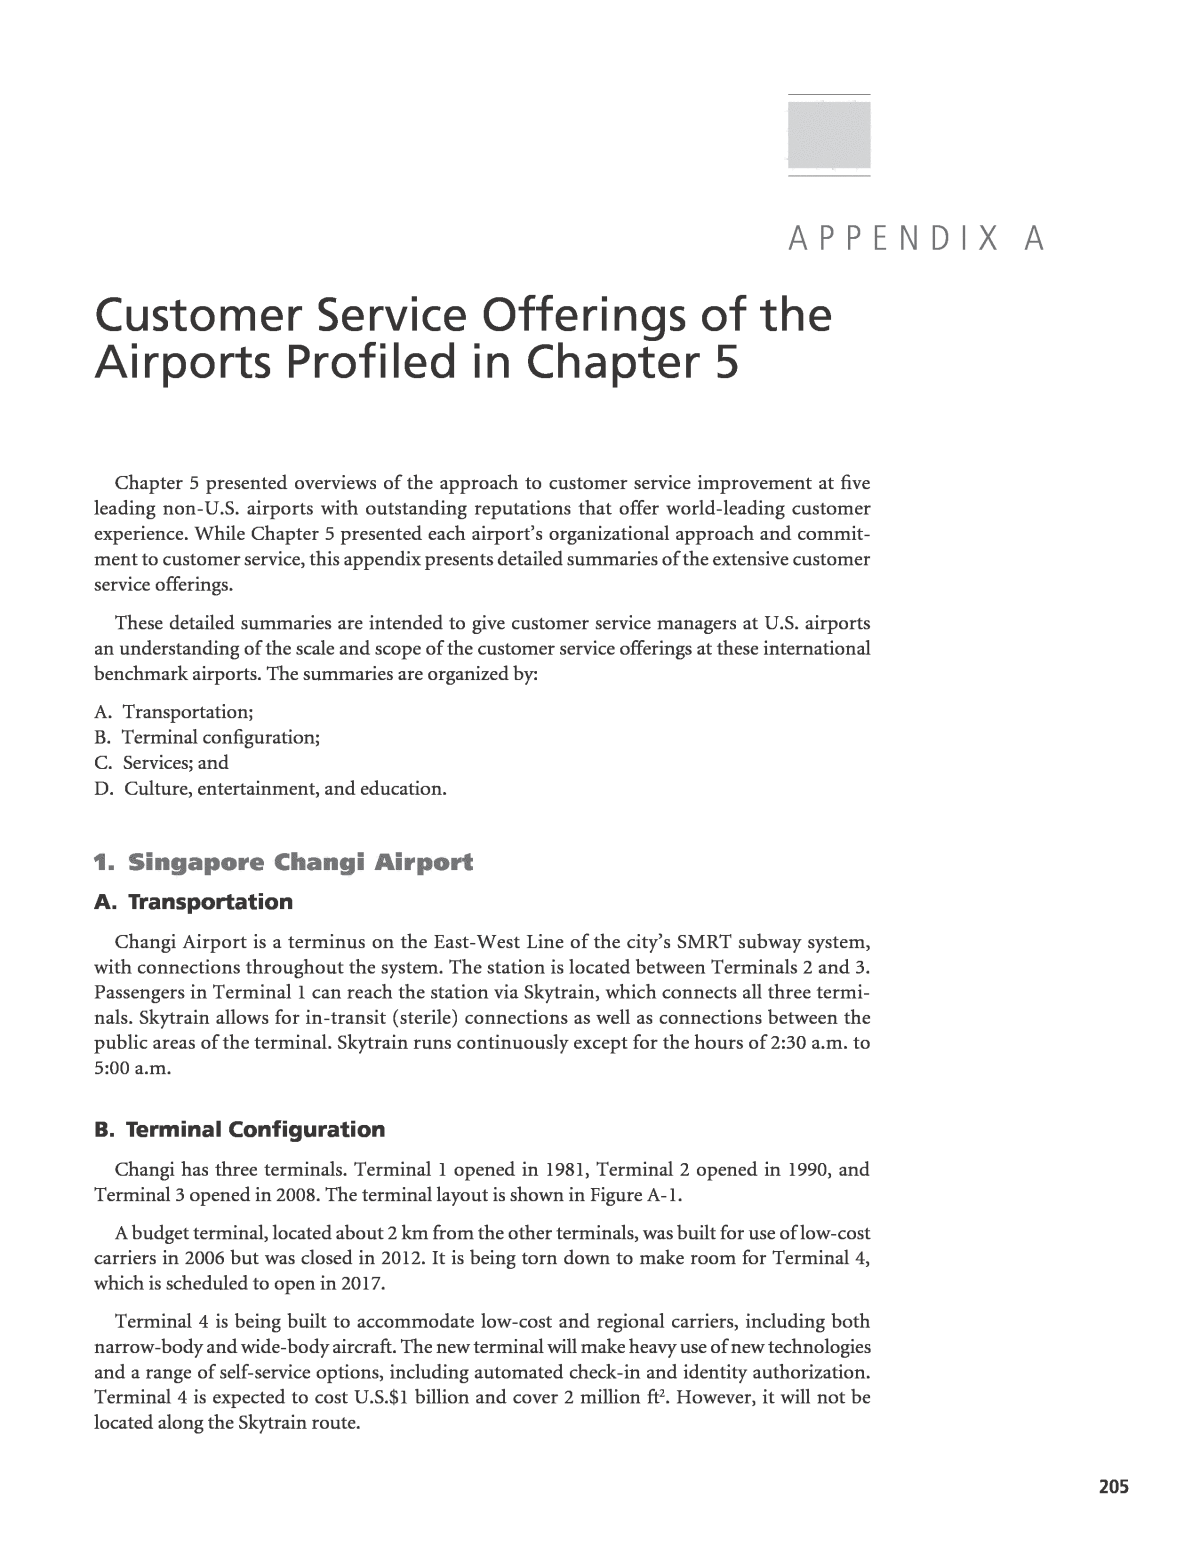 Appendix A - Customer Service Offerings of the Airports Profiled in Chapter  5 | Improving the Airport Customer Experience |The National Academies Press